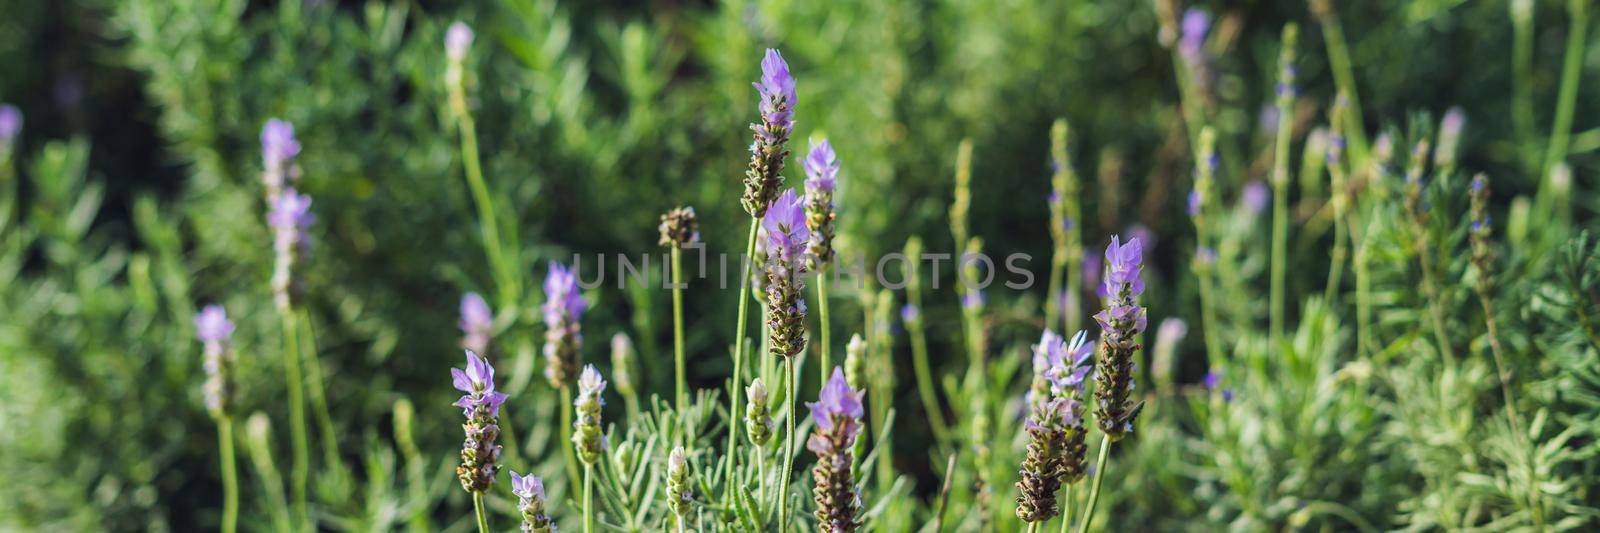 Lavender flowers at sunlight in a soft focus, pastel colors and blur background BANNER long format by galitskaya